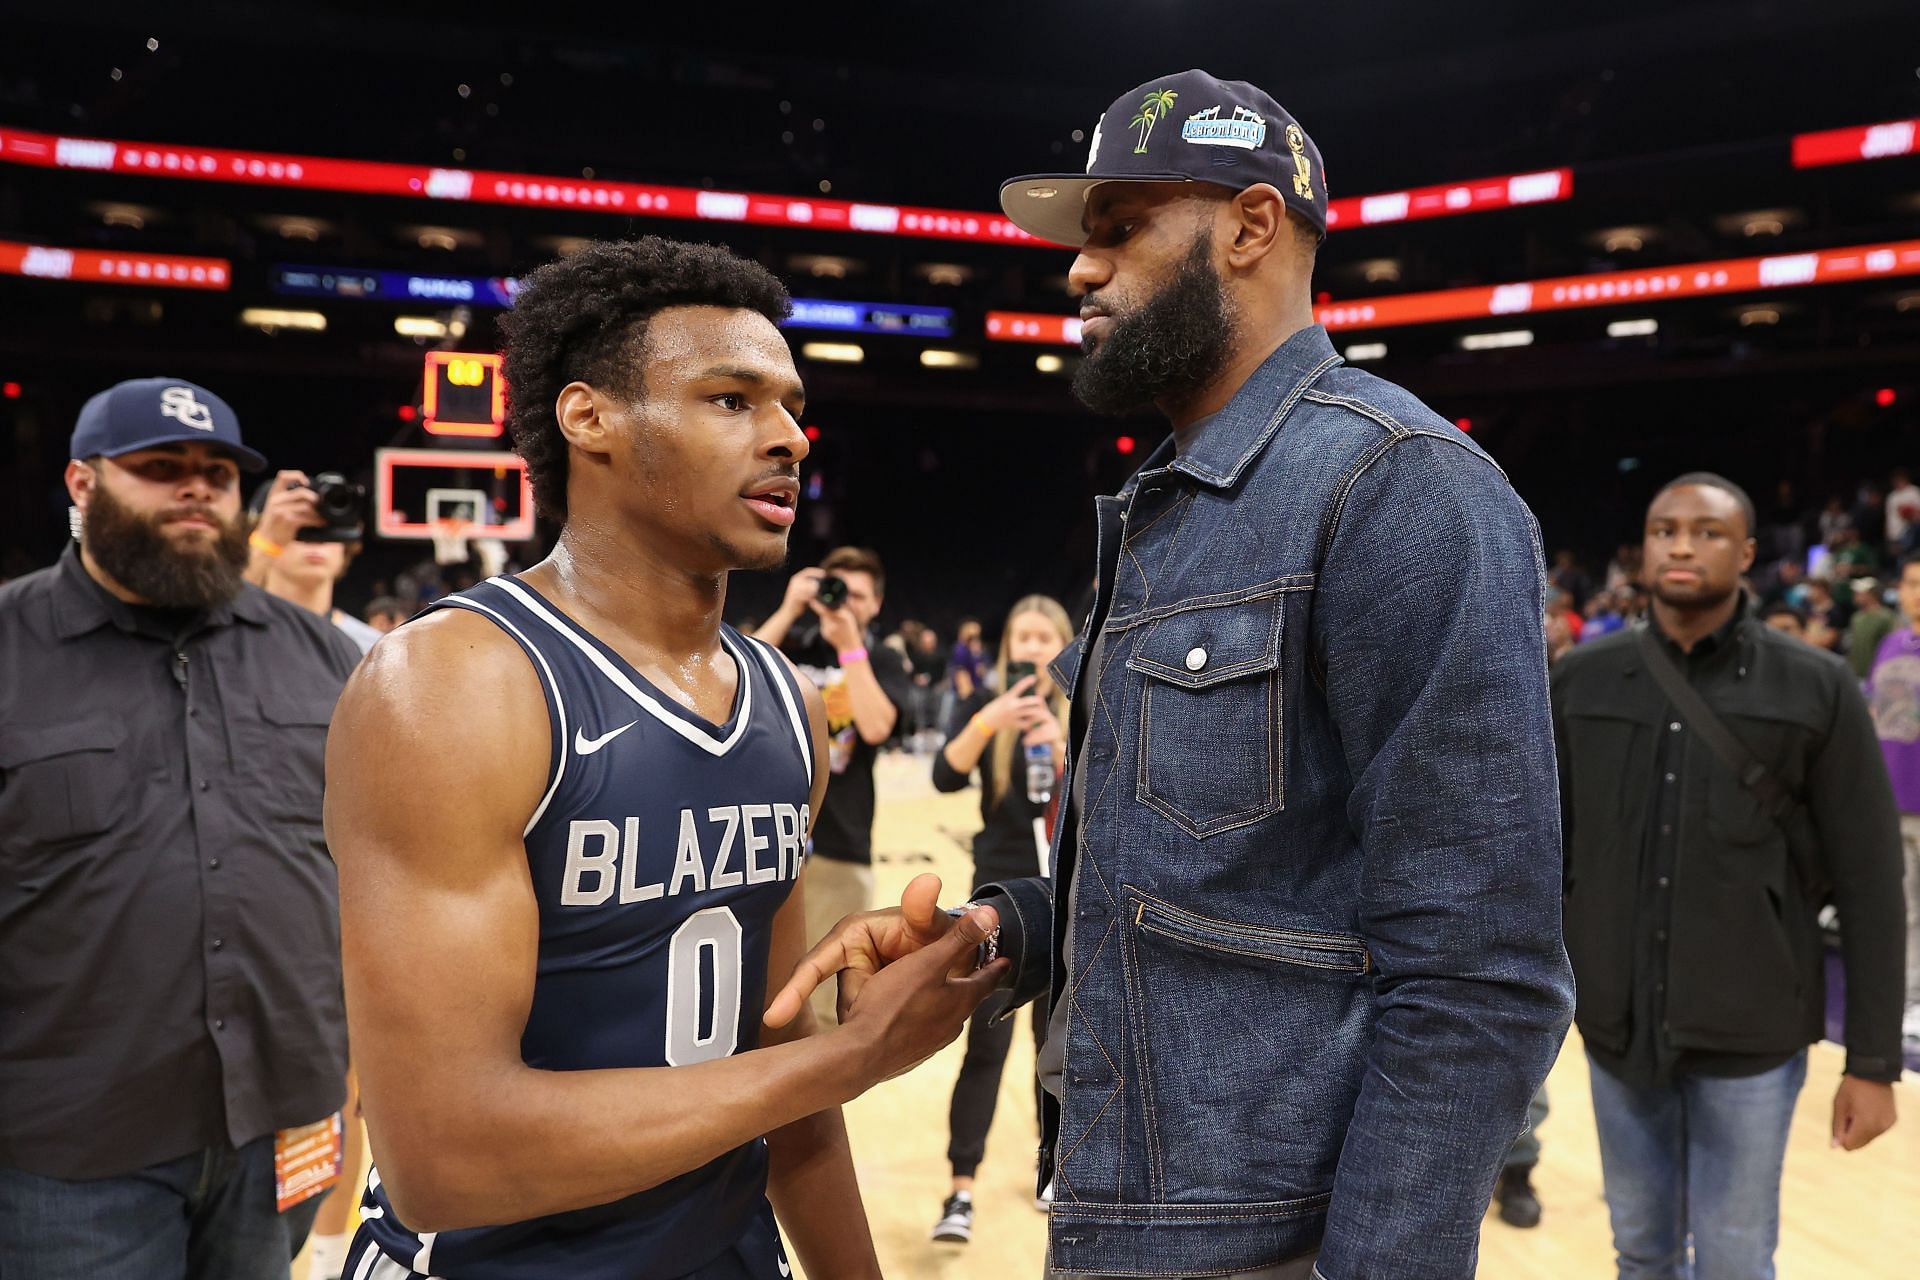 LeBron James may team up with his son Bronny James in the NBA (Image via Getty Images)